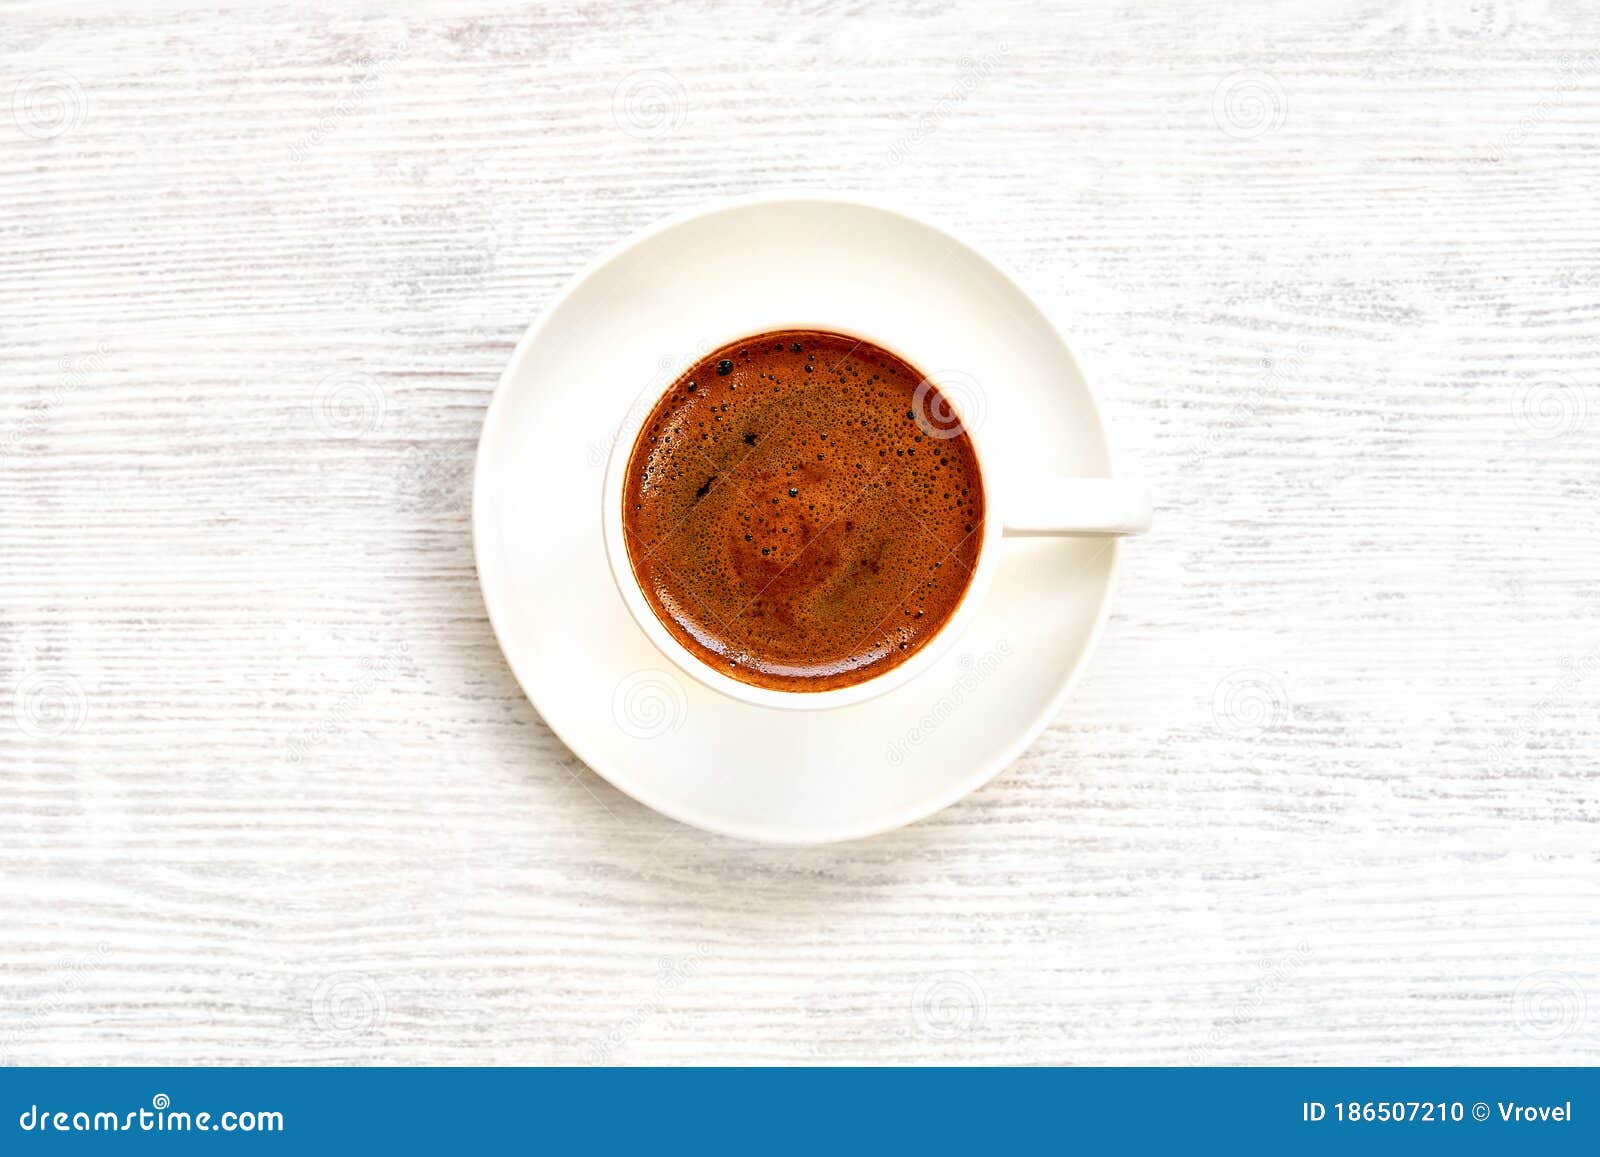 coffee cup with turkish coffee on white wooden table . top view